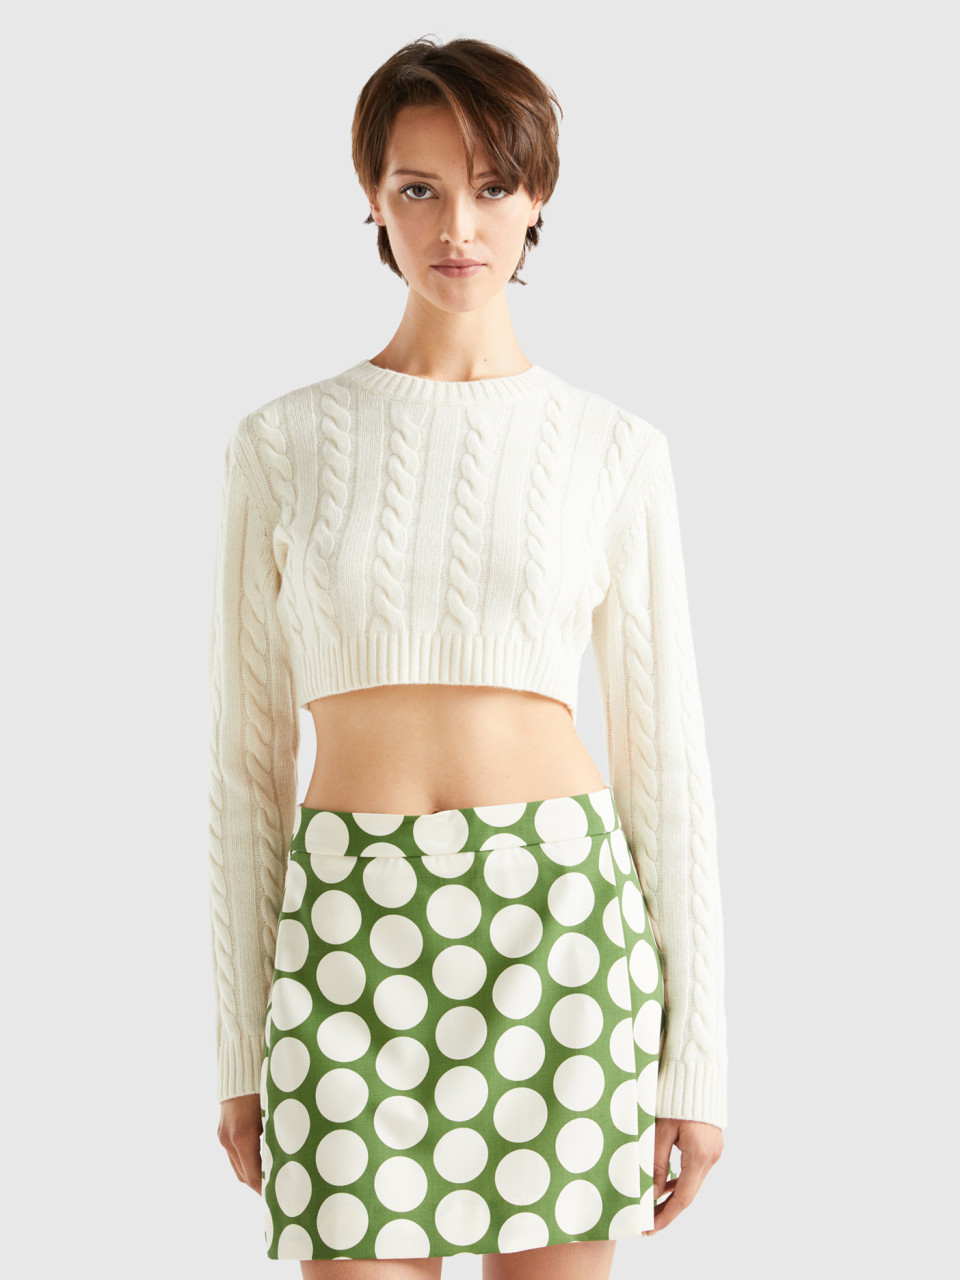 Benetton, Cropped Sweater With Cables, White, Women